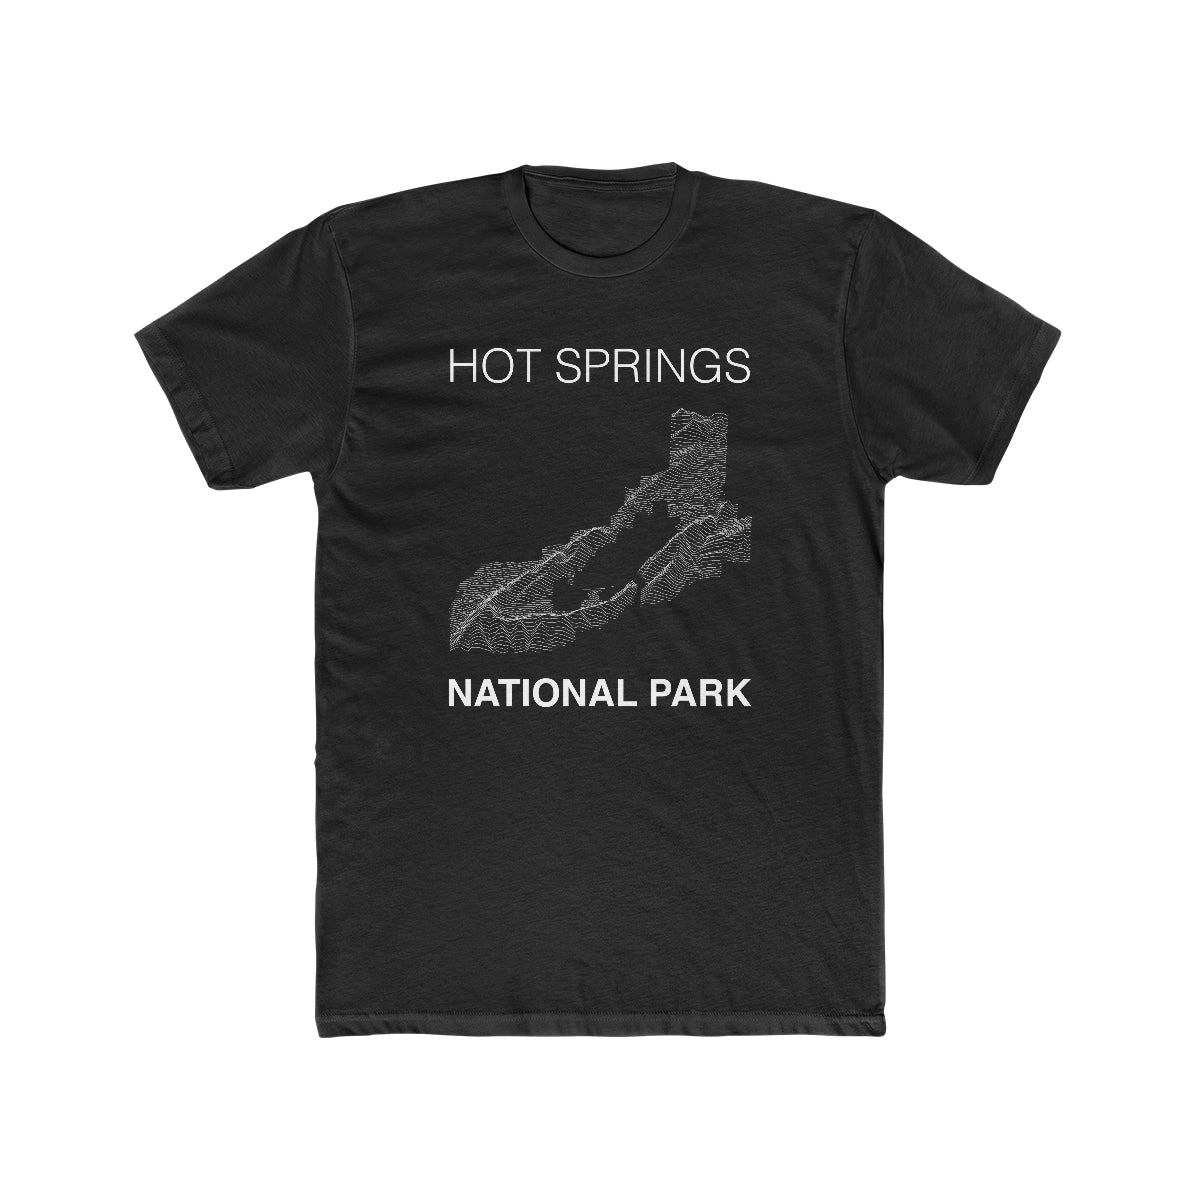 Hot Springs National Park T-Shirt Lines